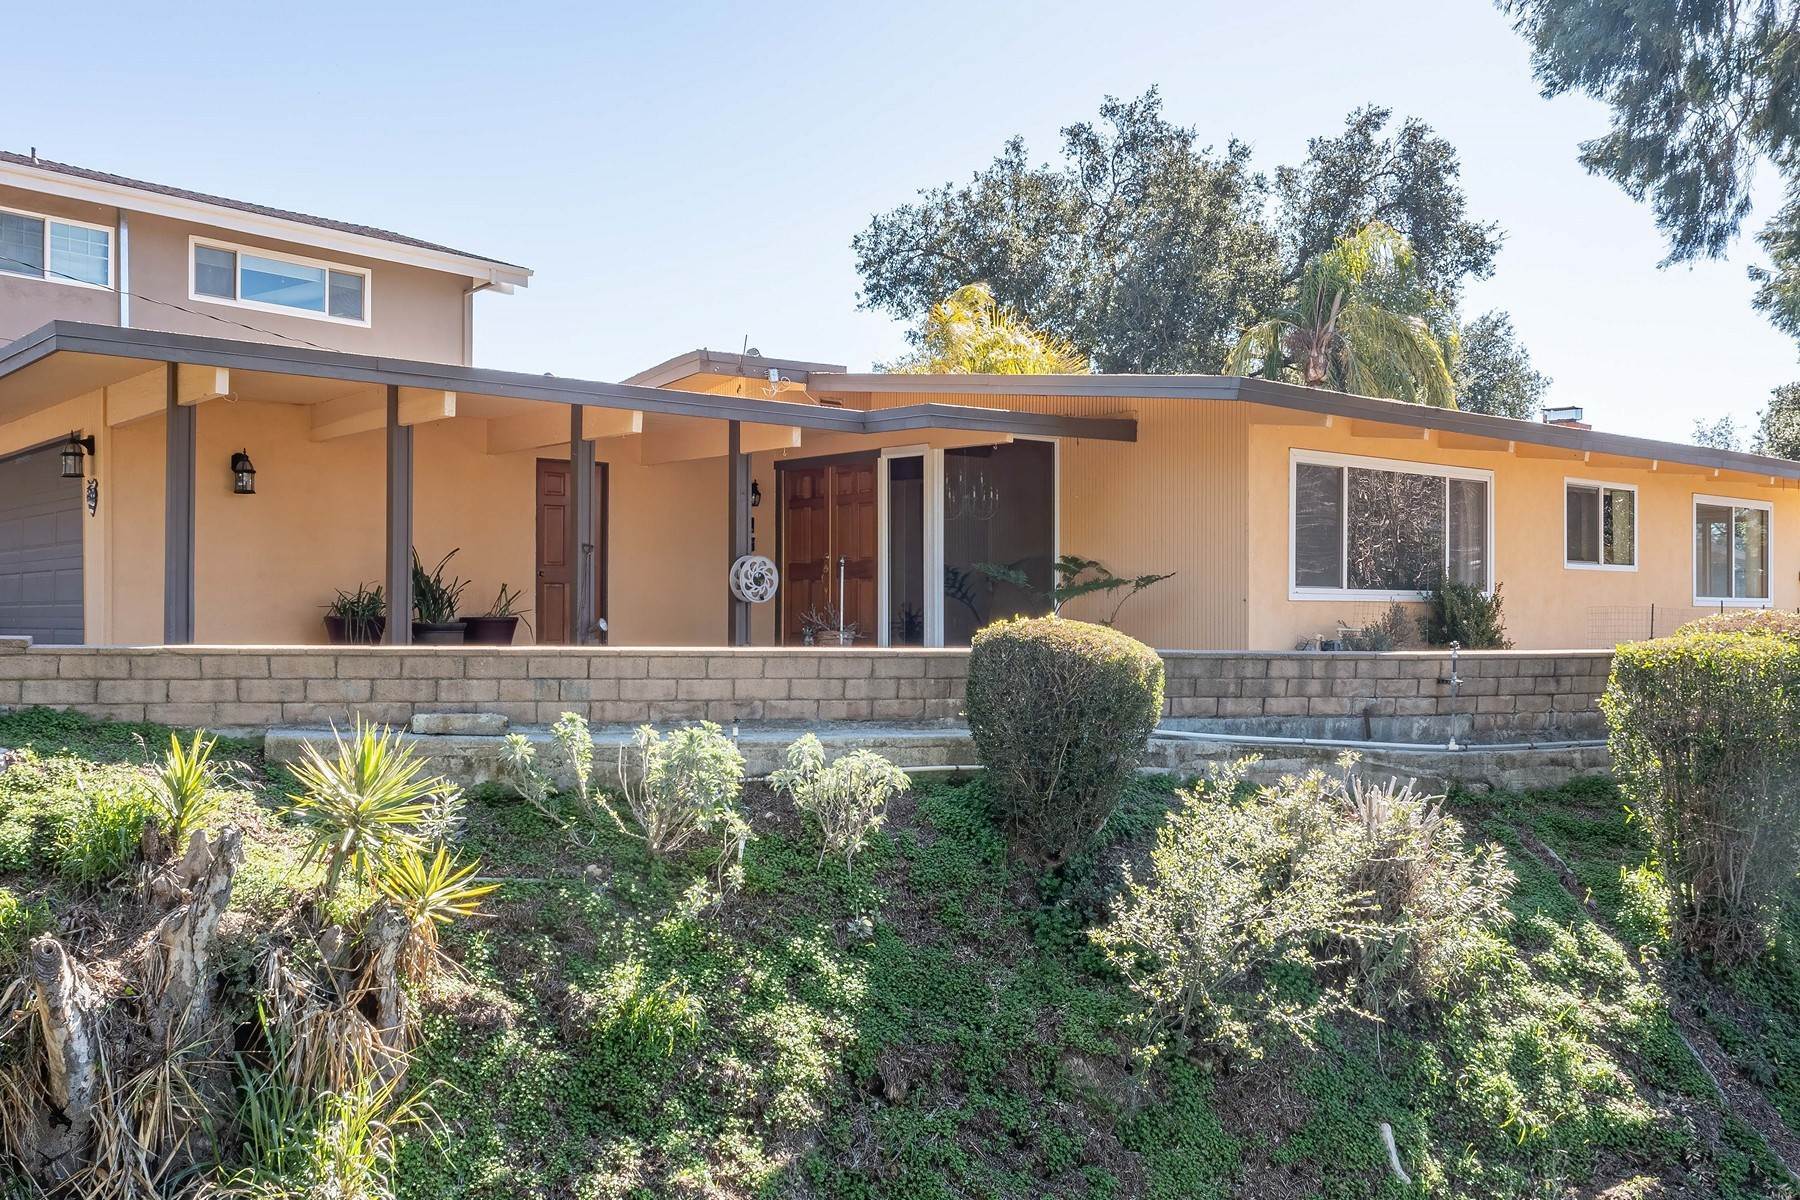 Property for Sale at 2475 Shields Street, La Crescenta, CA 91214 2475 Shields Street La Crescenta, California 91214 United States